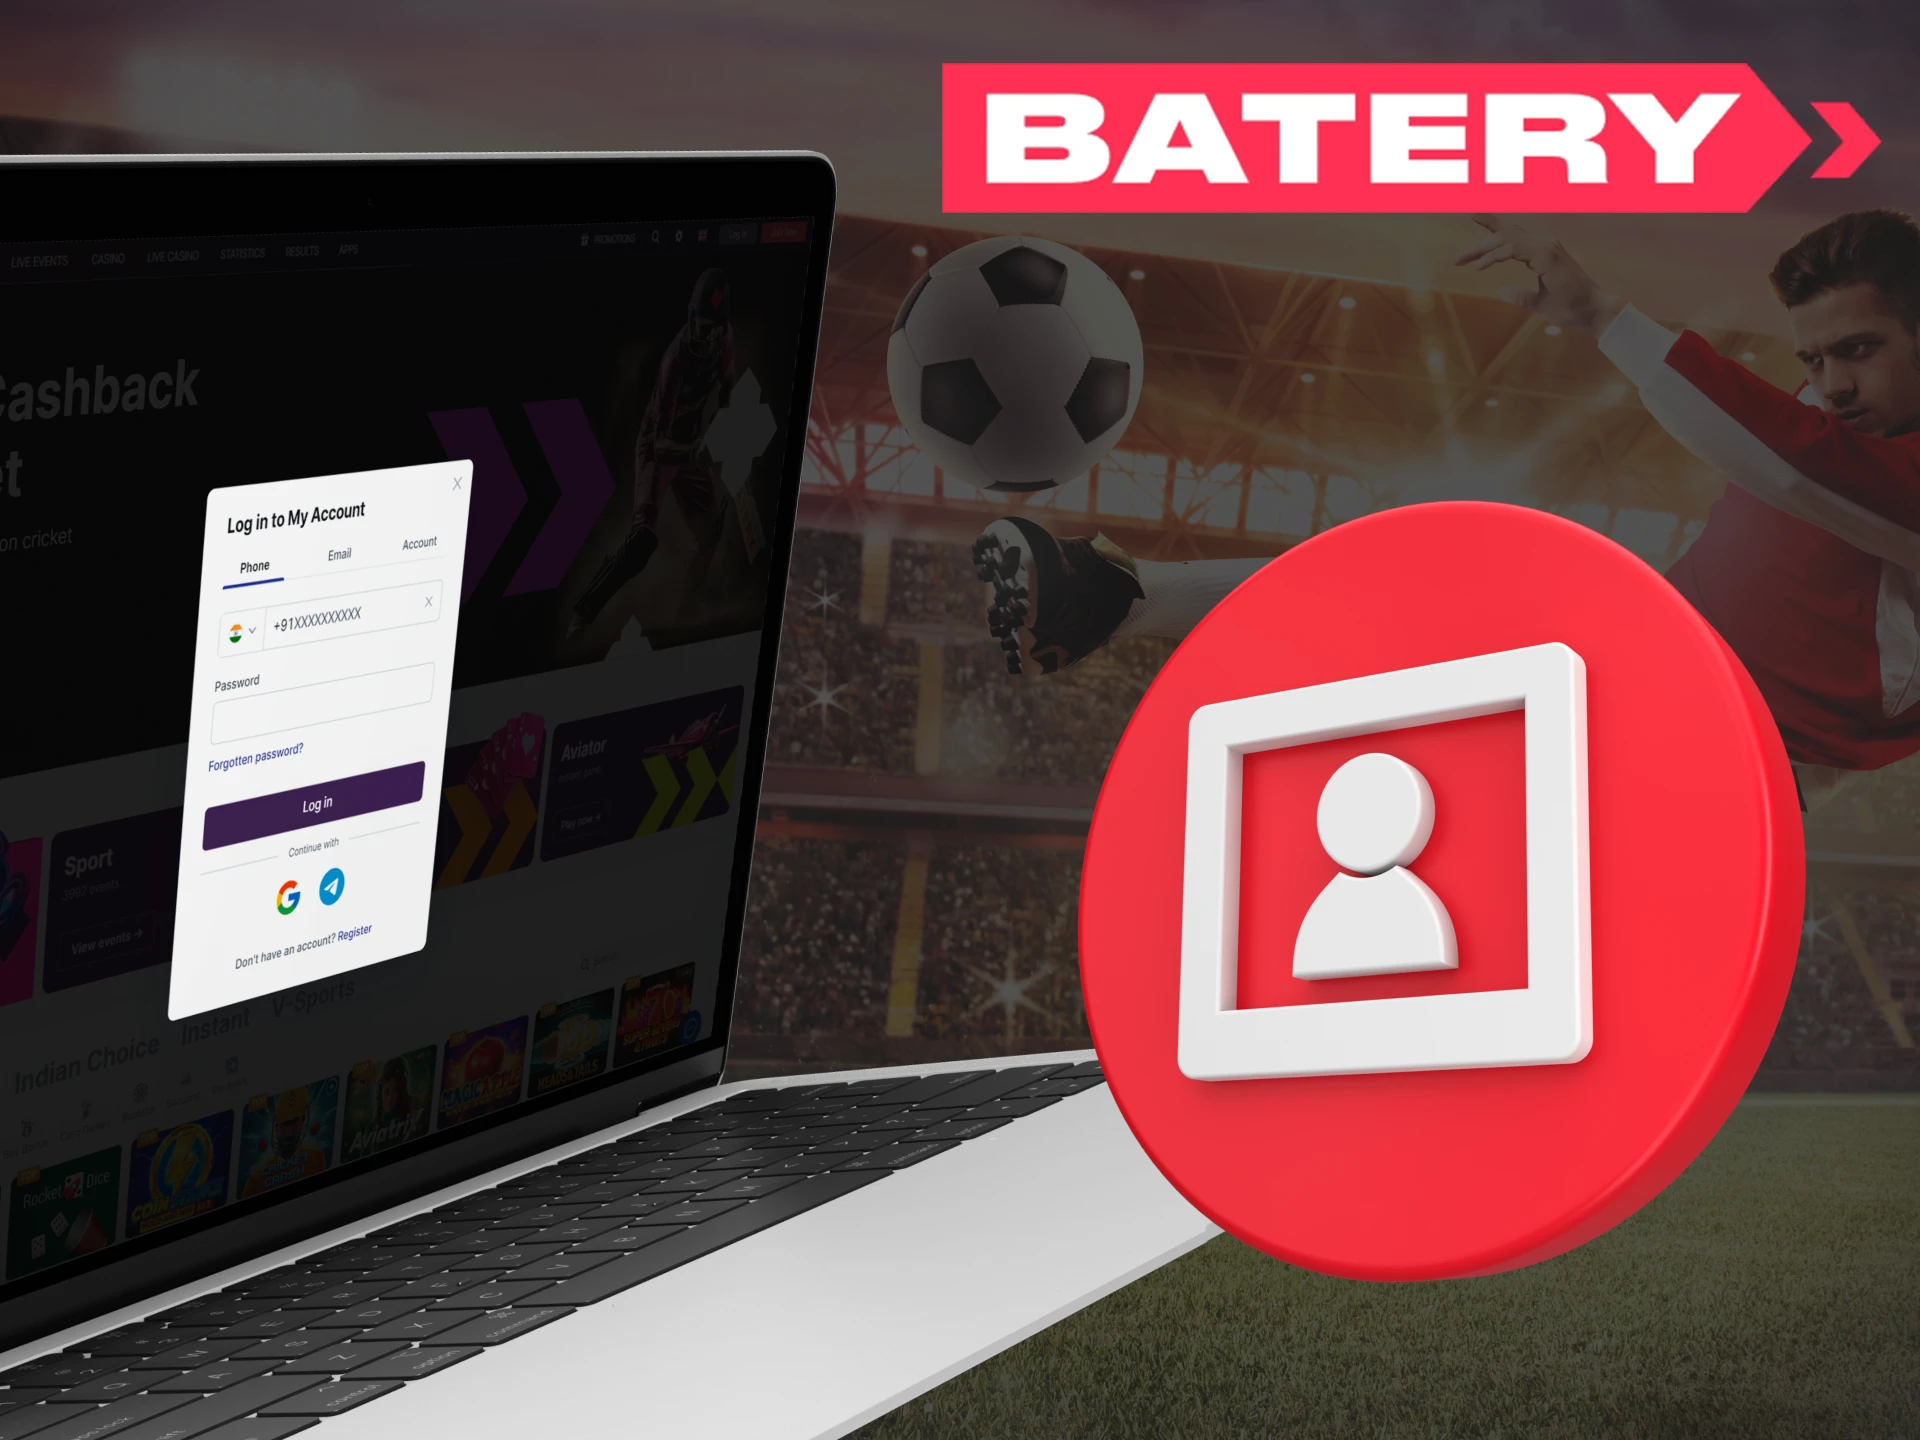 If you have a Batery account, log in to place bets and play in the casino.